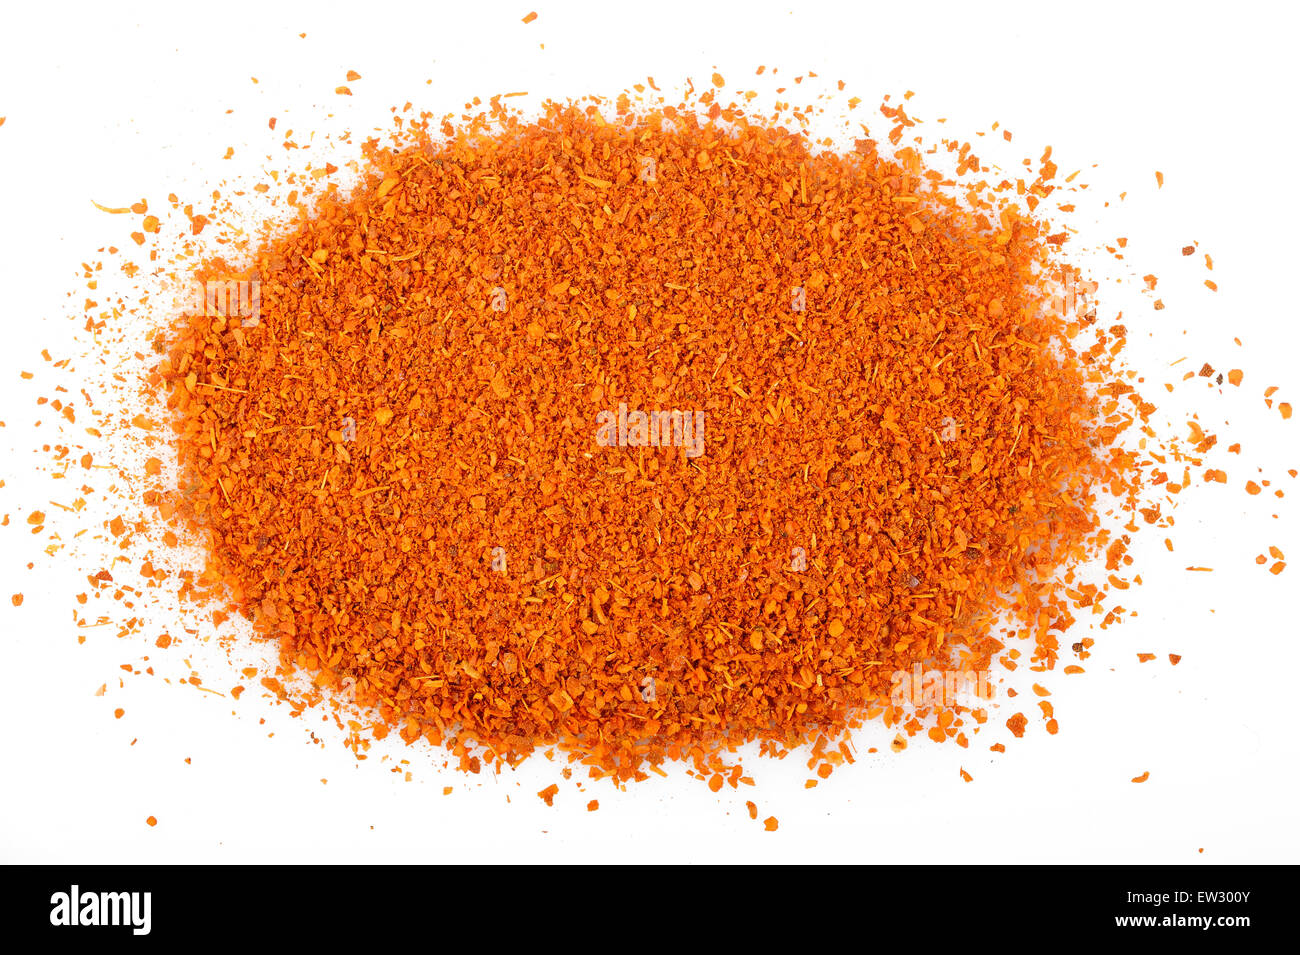 cayenne pepper on white background Stock Photo